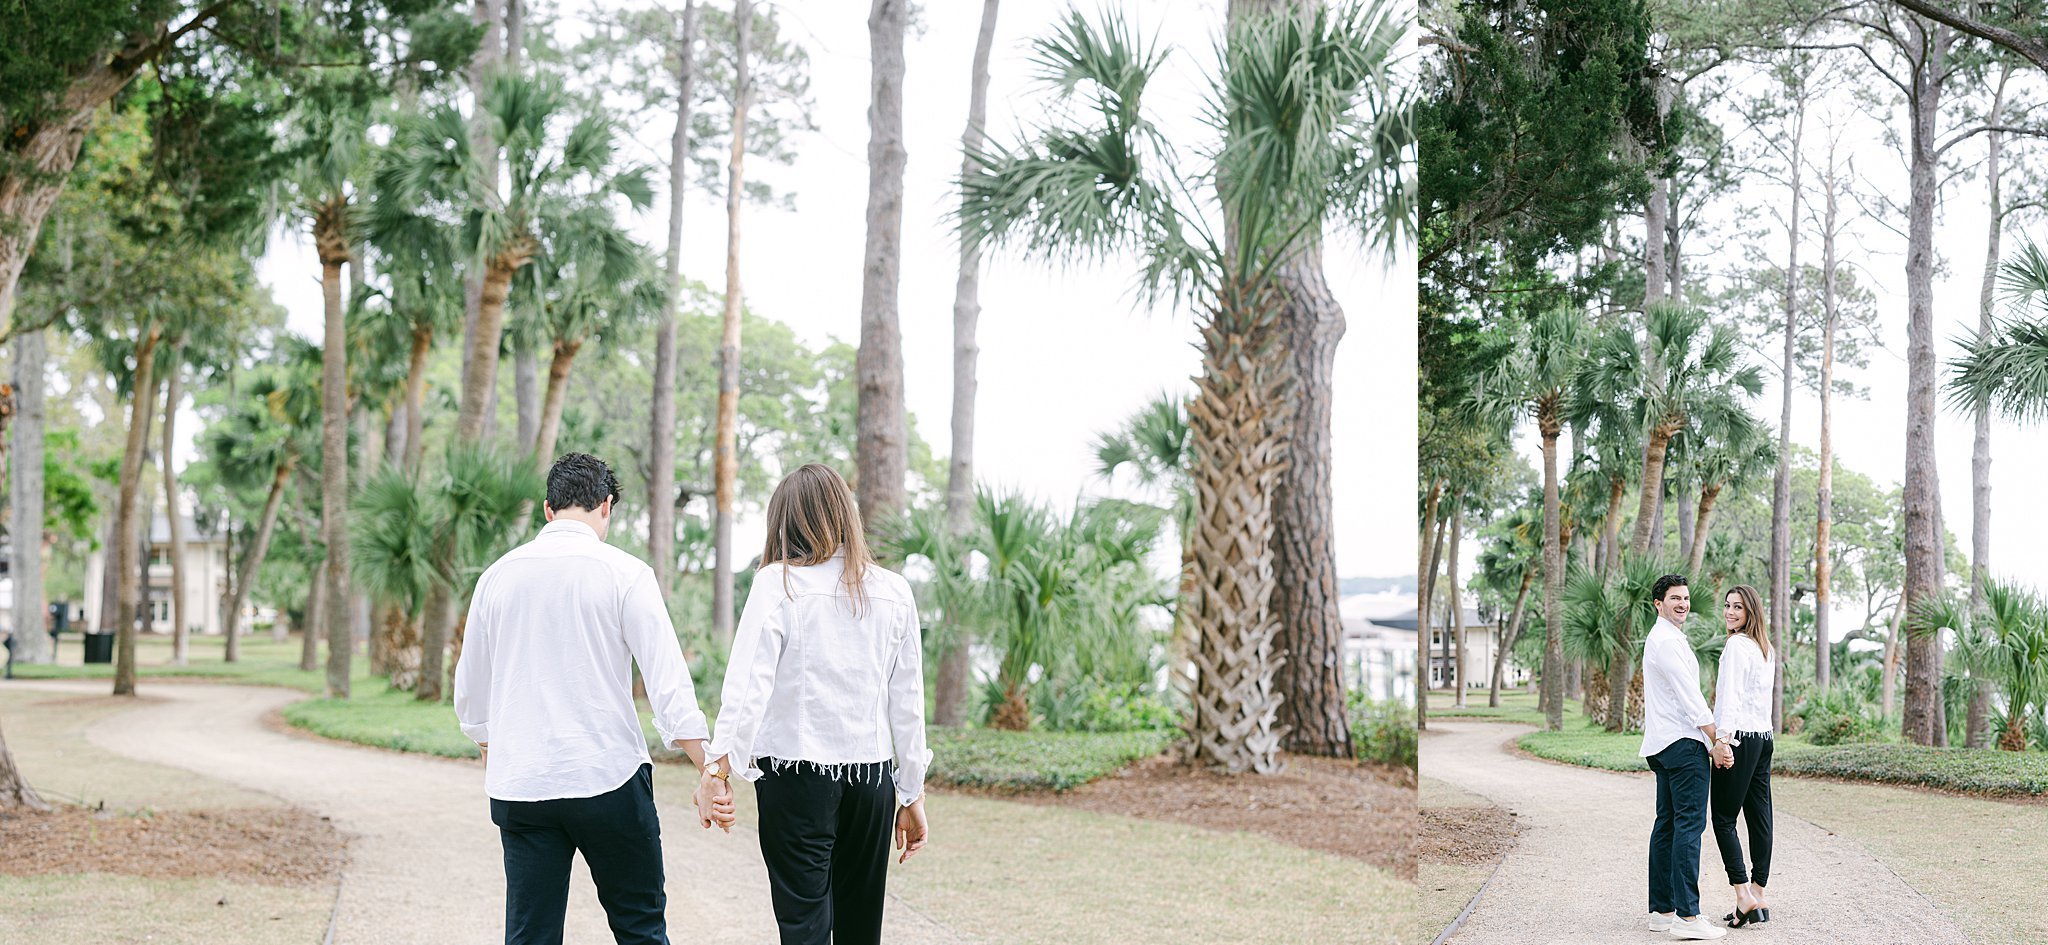 Katherine_Ives_Photography_Surprise_Proposal_Montage_Palmetto_Bluff__Session_72620.JPG